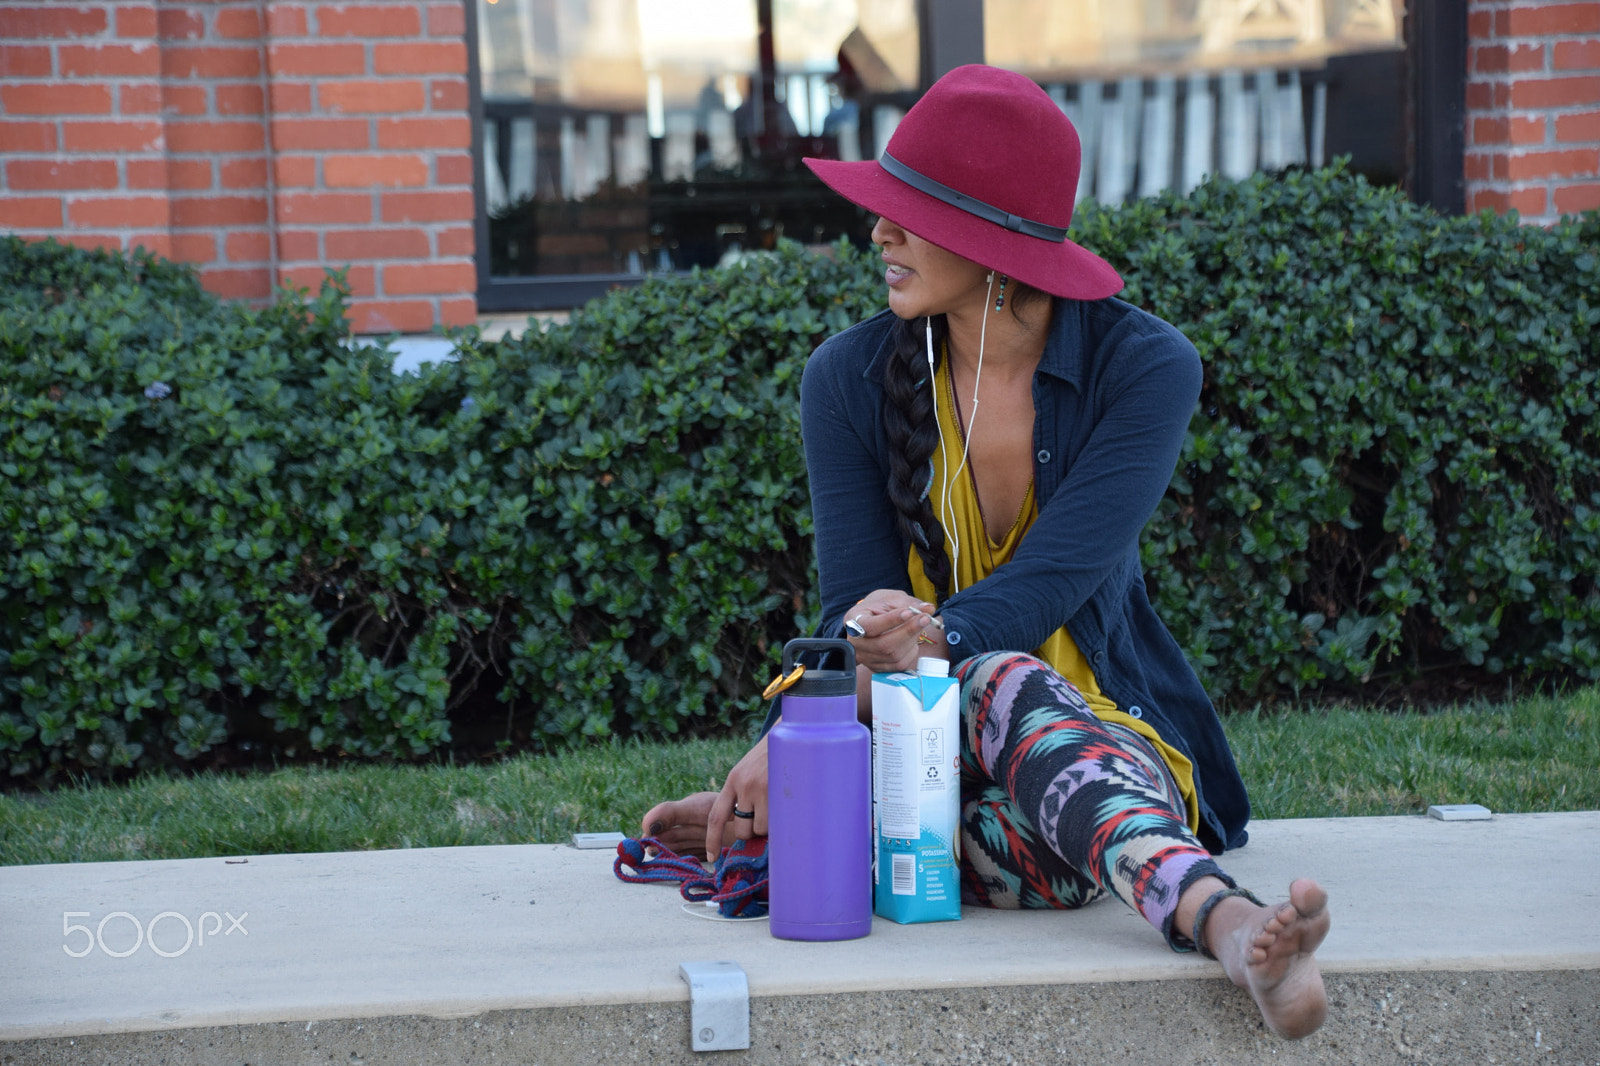 Nikon D5300 sample photo. Chilling in purple hat photography